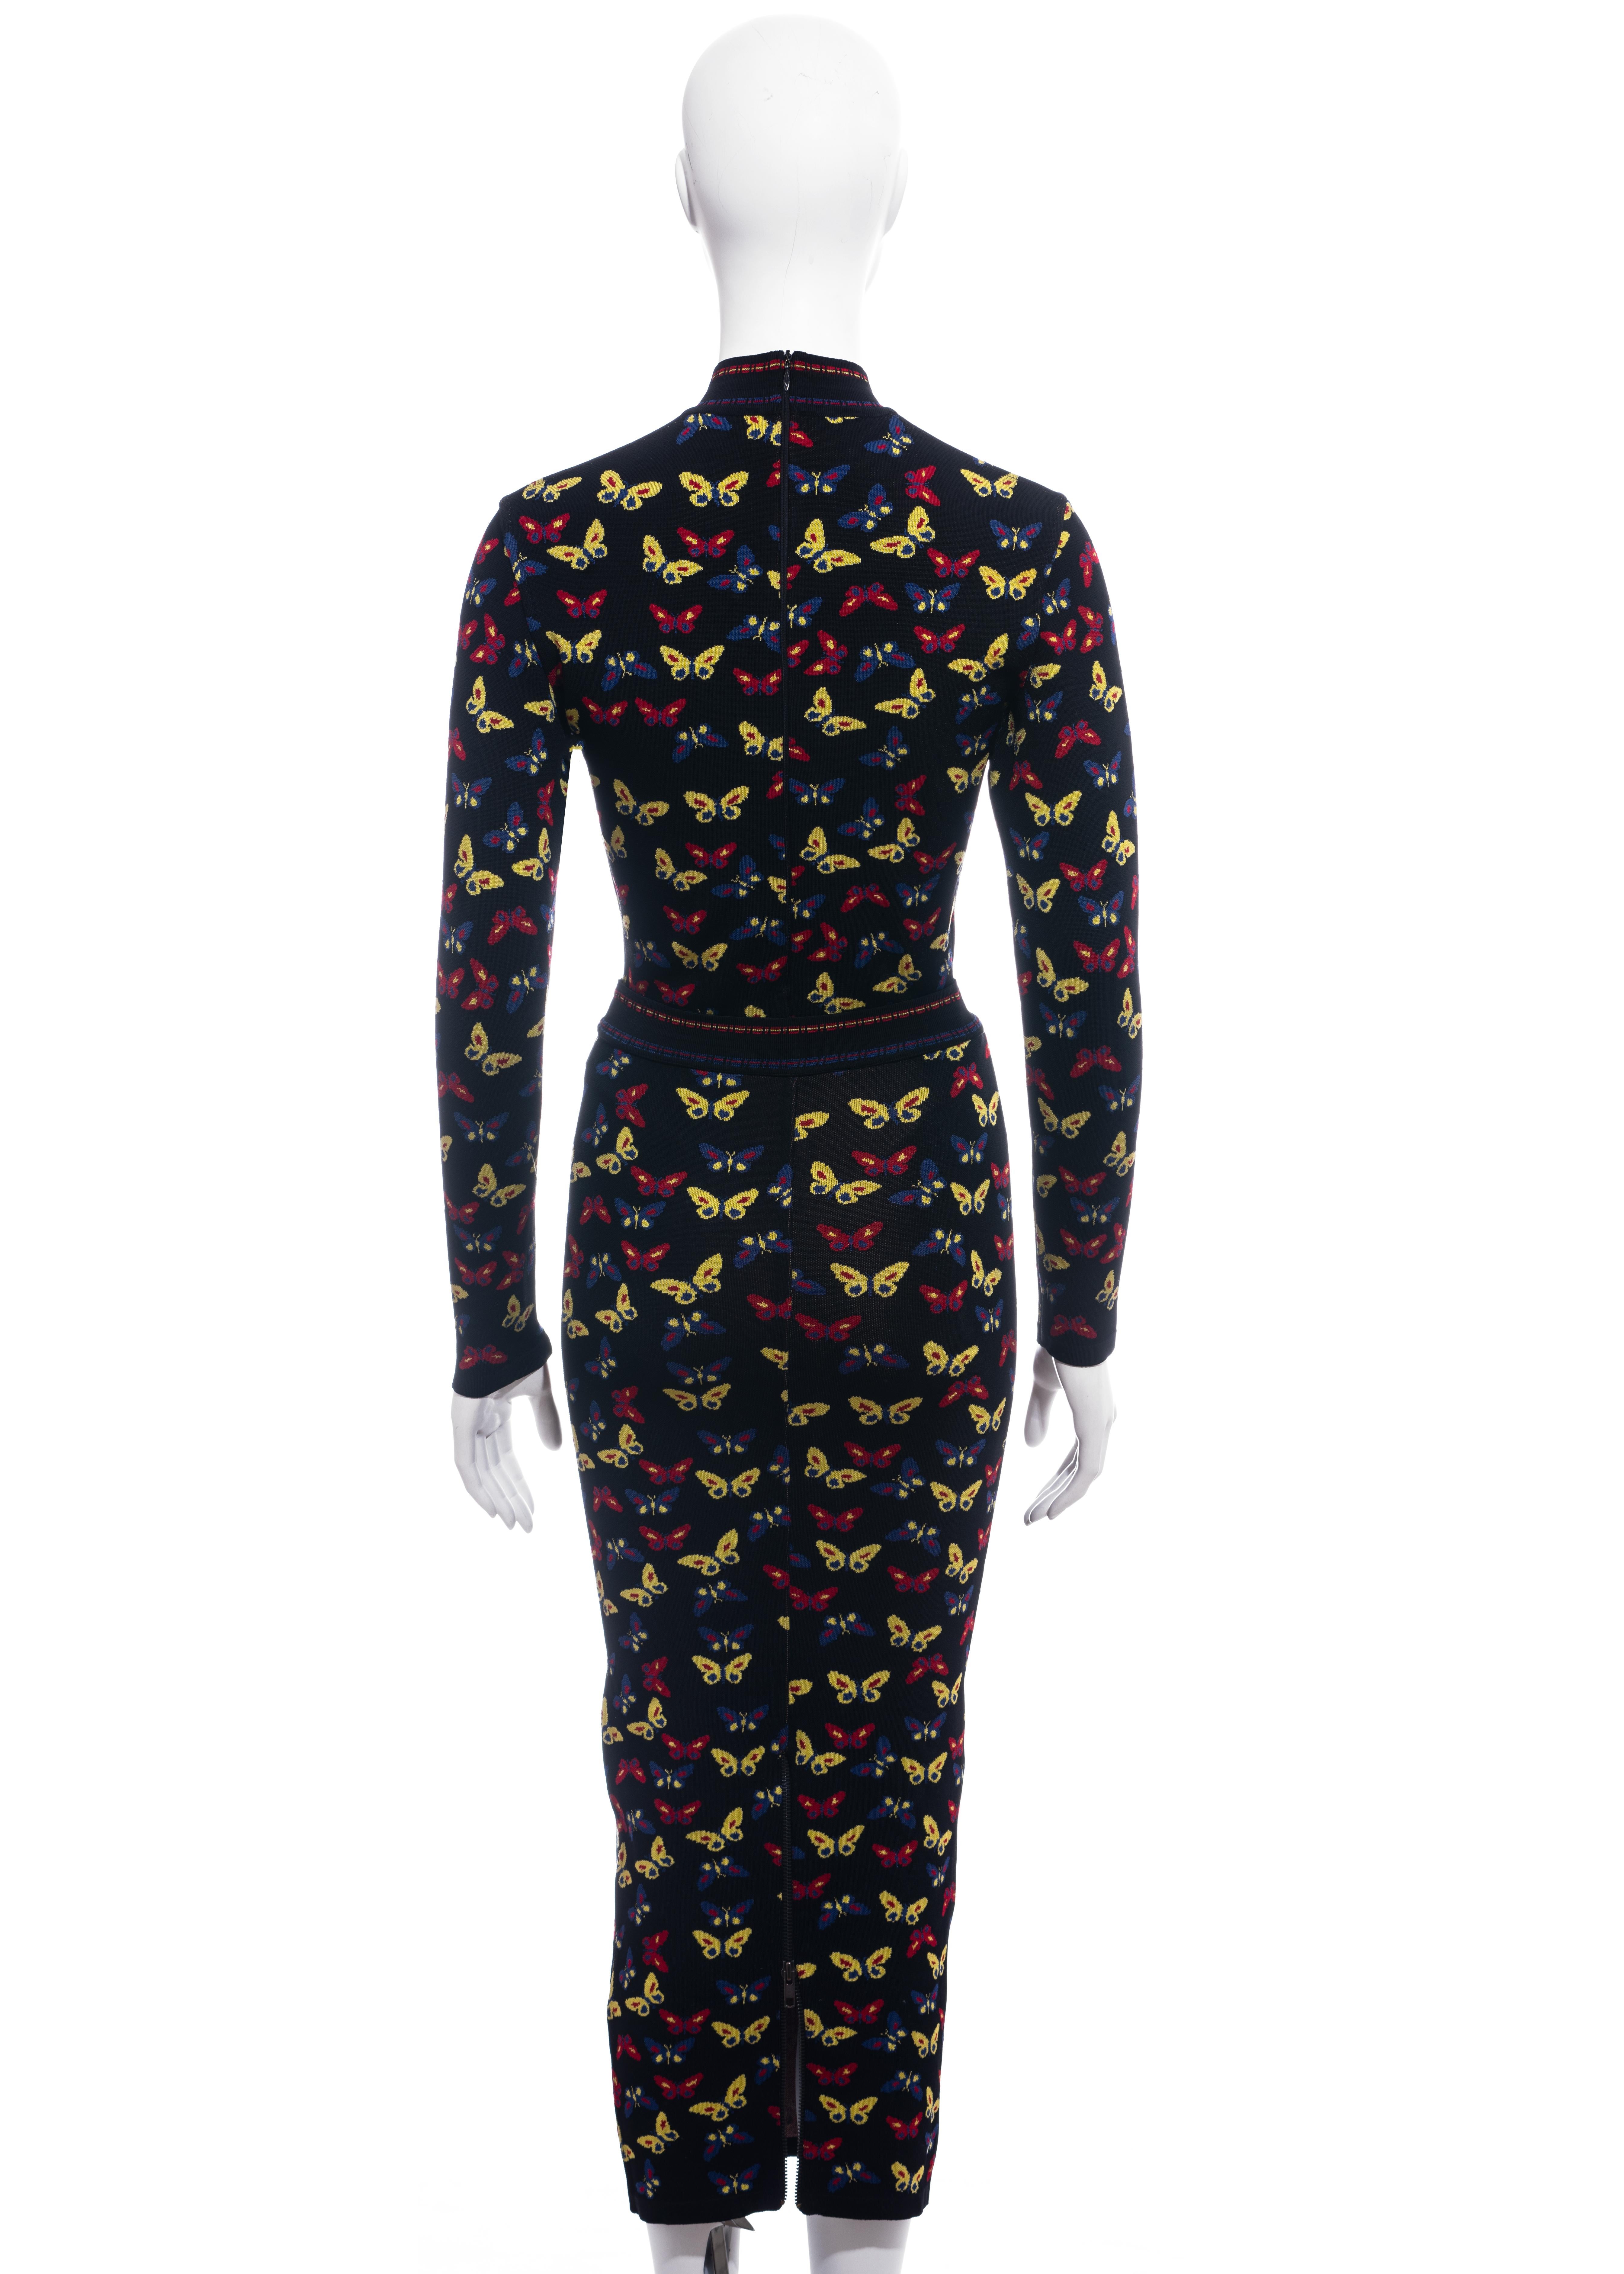 Azzedine Alaia multicoloured rayon knit butterfly two-piece dress, fw 1991 For Sale 1